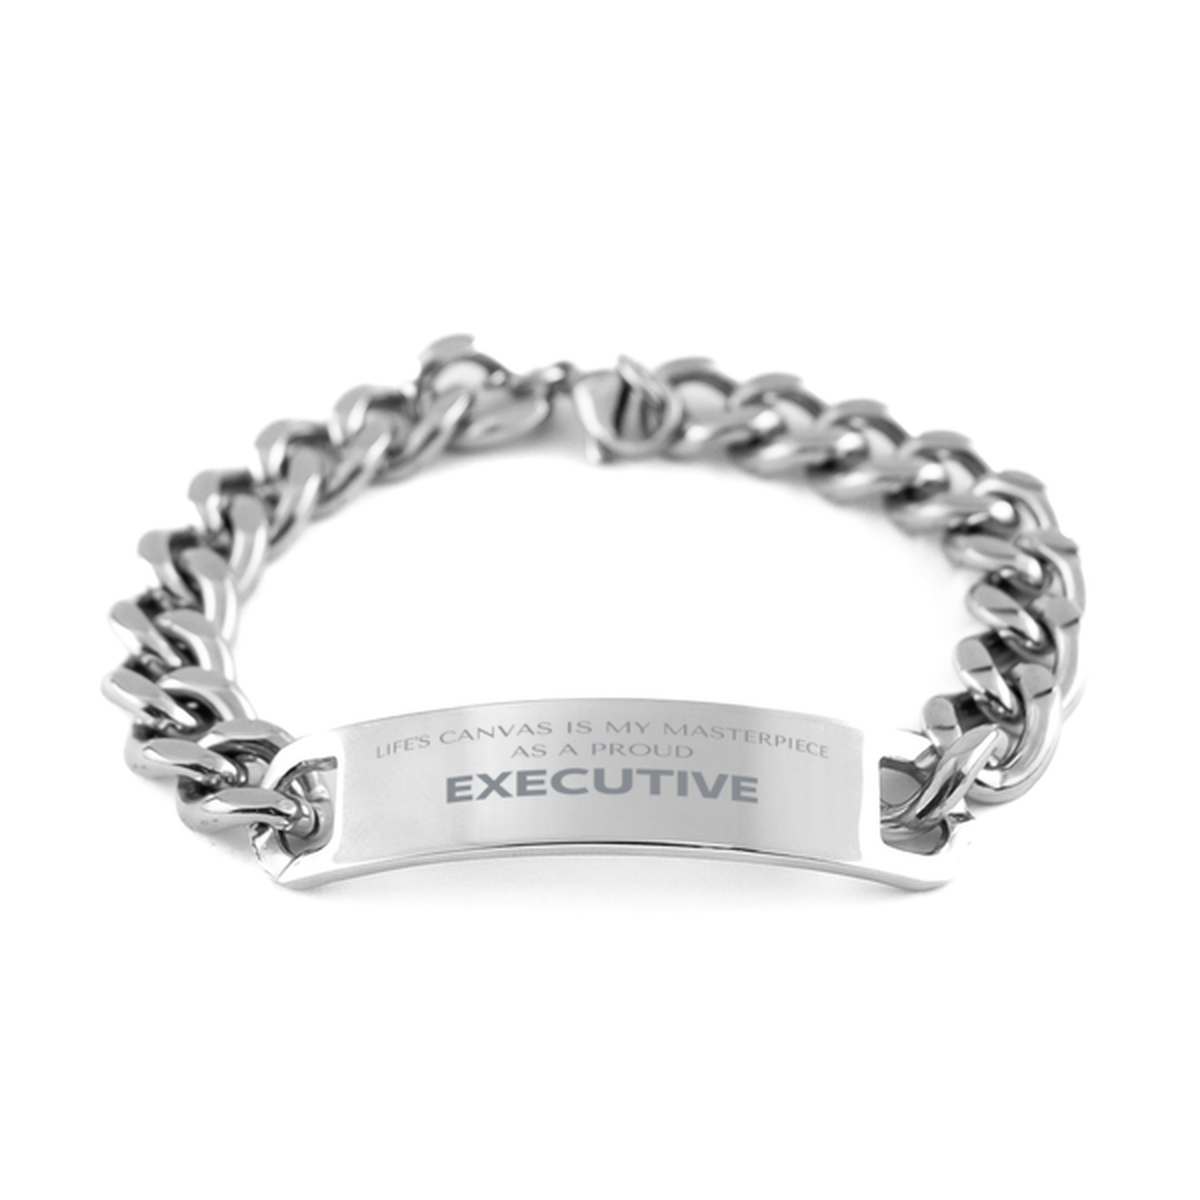 Proud Executive Gifts, Life's canvas is my masterpiece, Epic Birthday Christmas Unique Cuban Chain Stainless Steel Bracelet For Executive, Coworkers, Men, Women, Friends